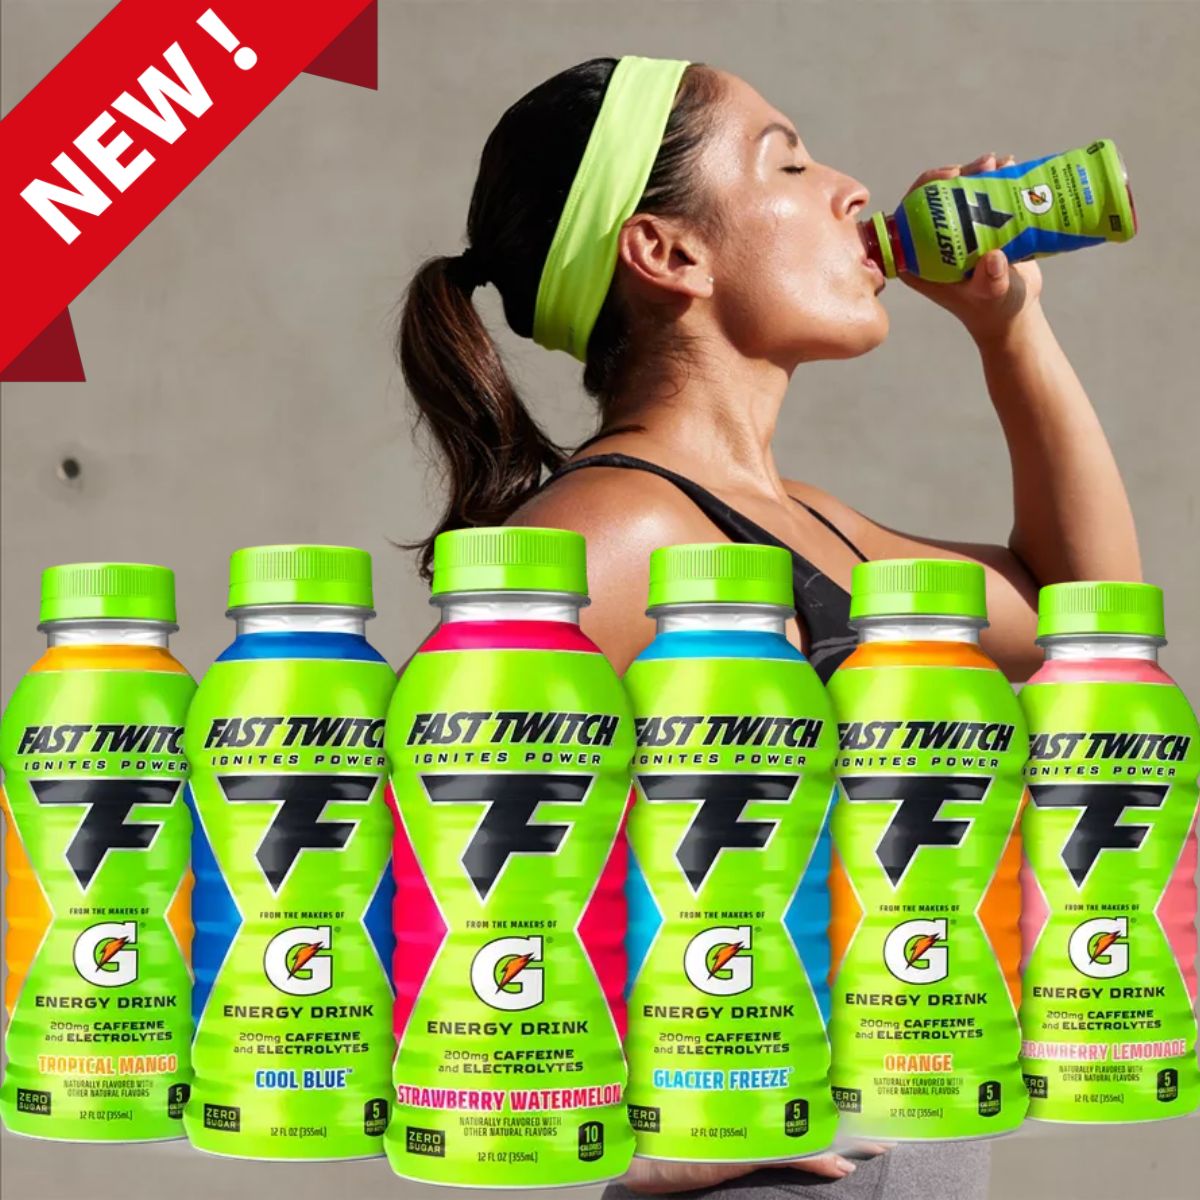 Gatorade's All New Fast Twitch Energy Drink Features 200mg Caffeine